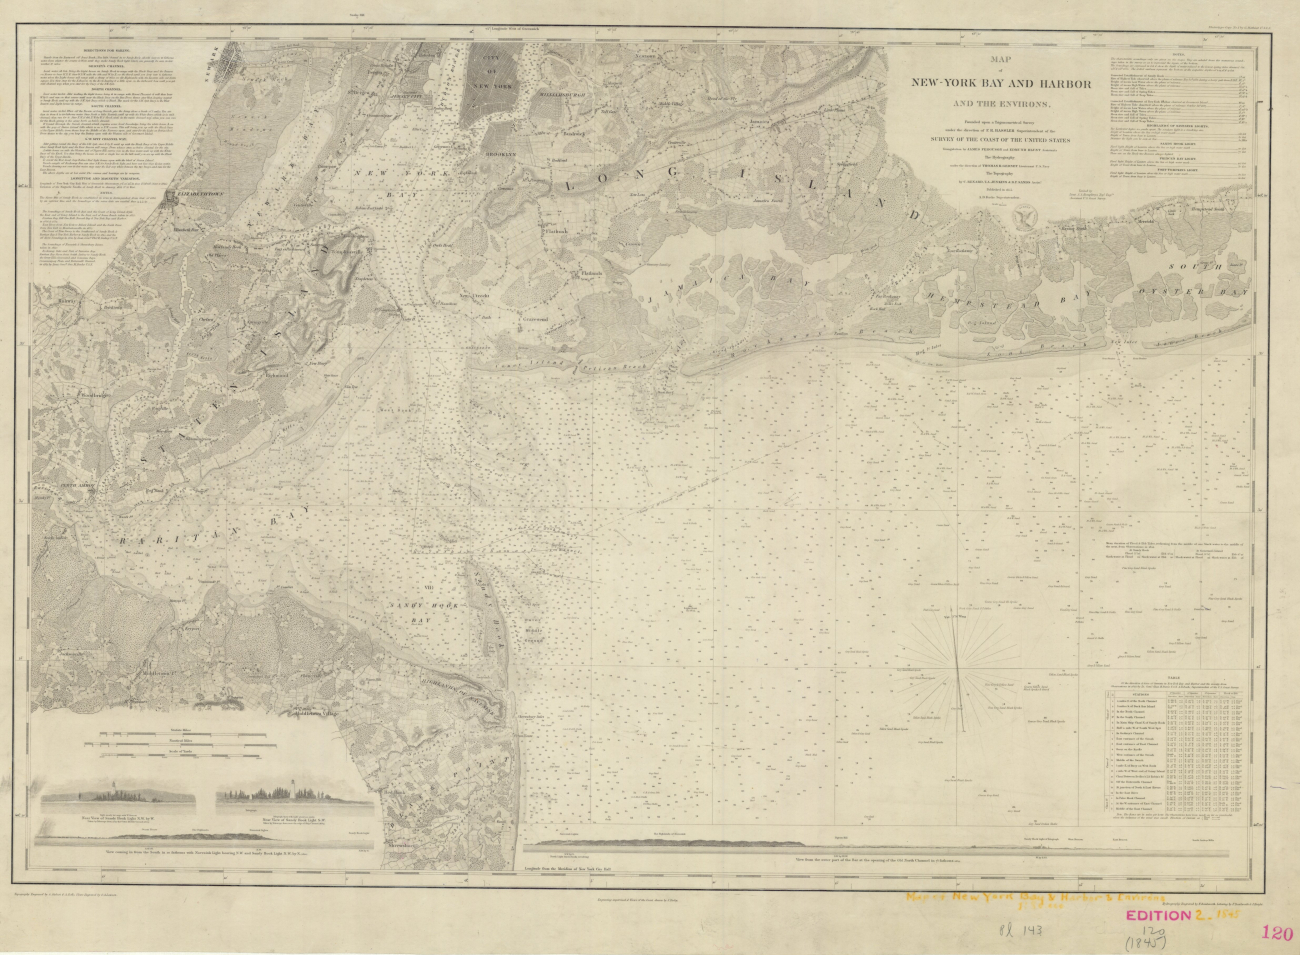 Single sheet of Map of New York Bay and Harbor